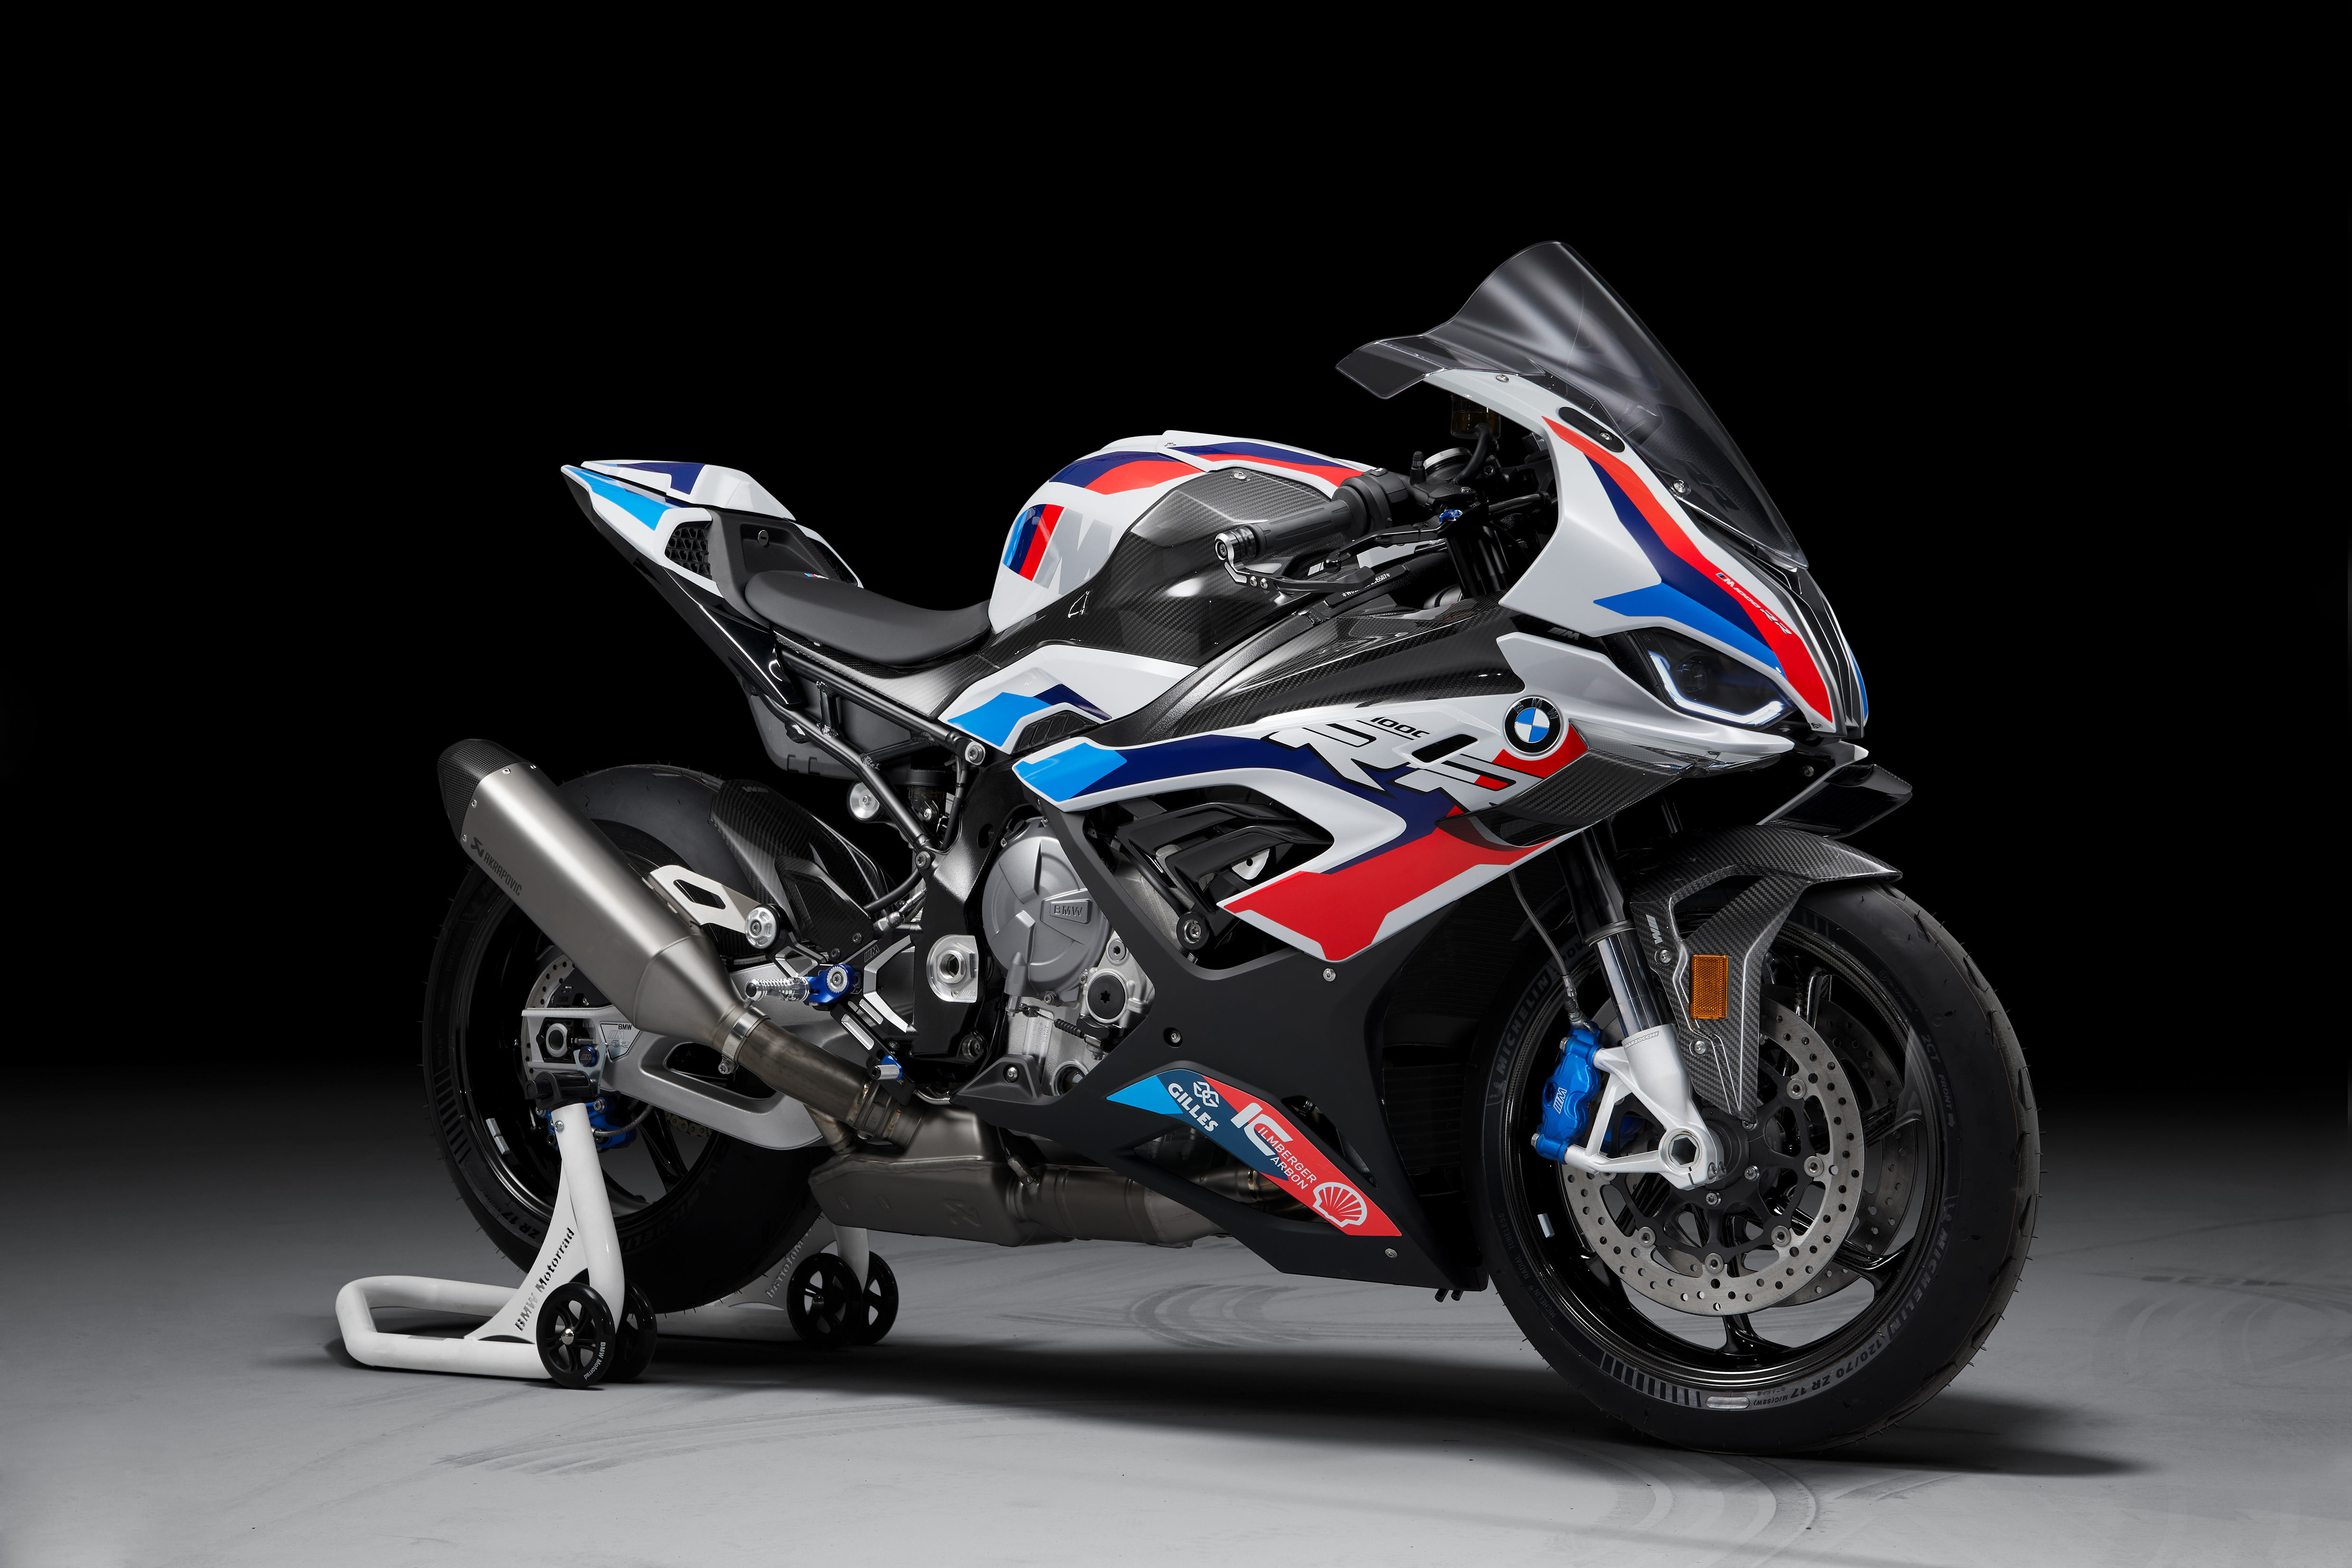 The new BMW S1000RR 2019 ridden and reviewed at Estoril